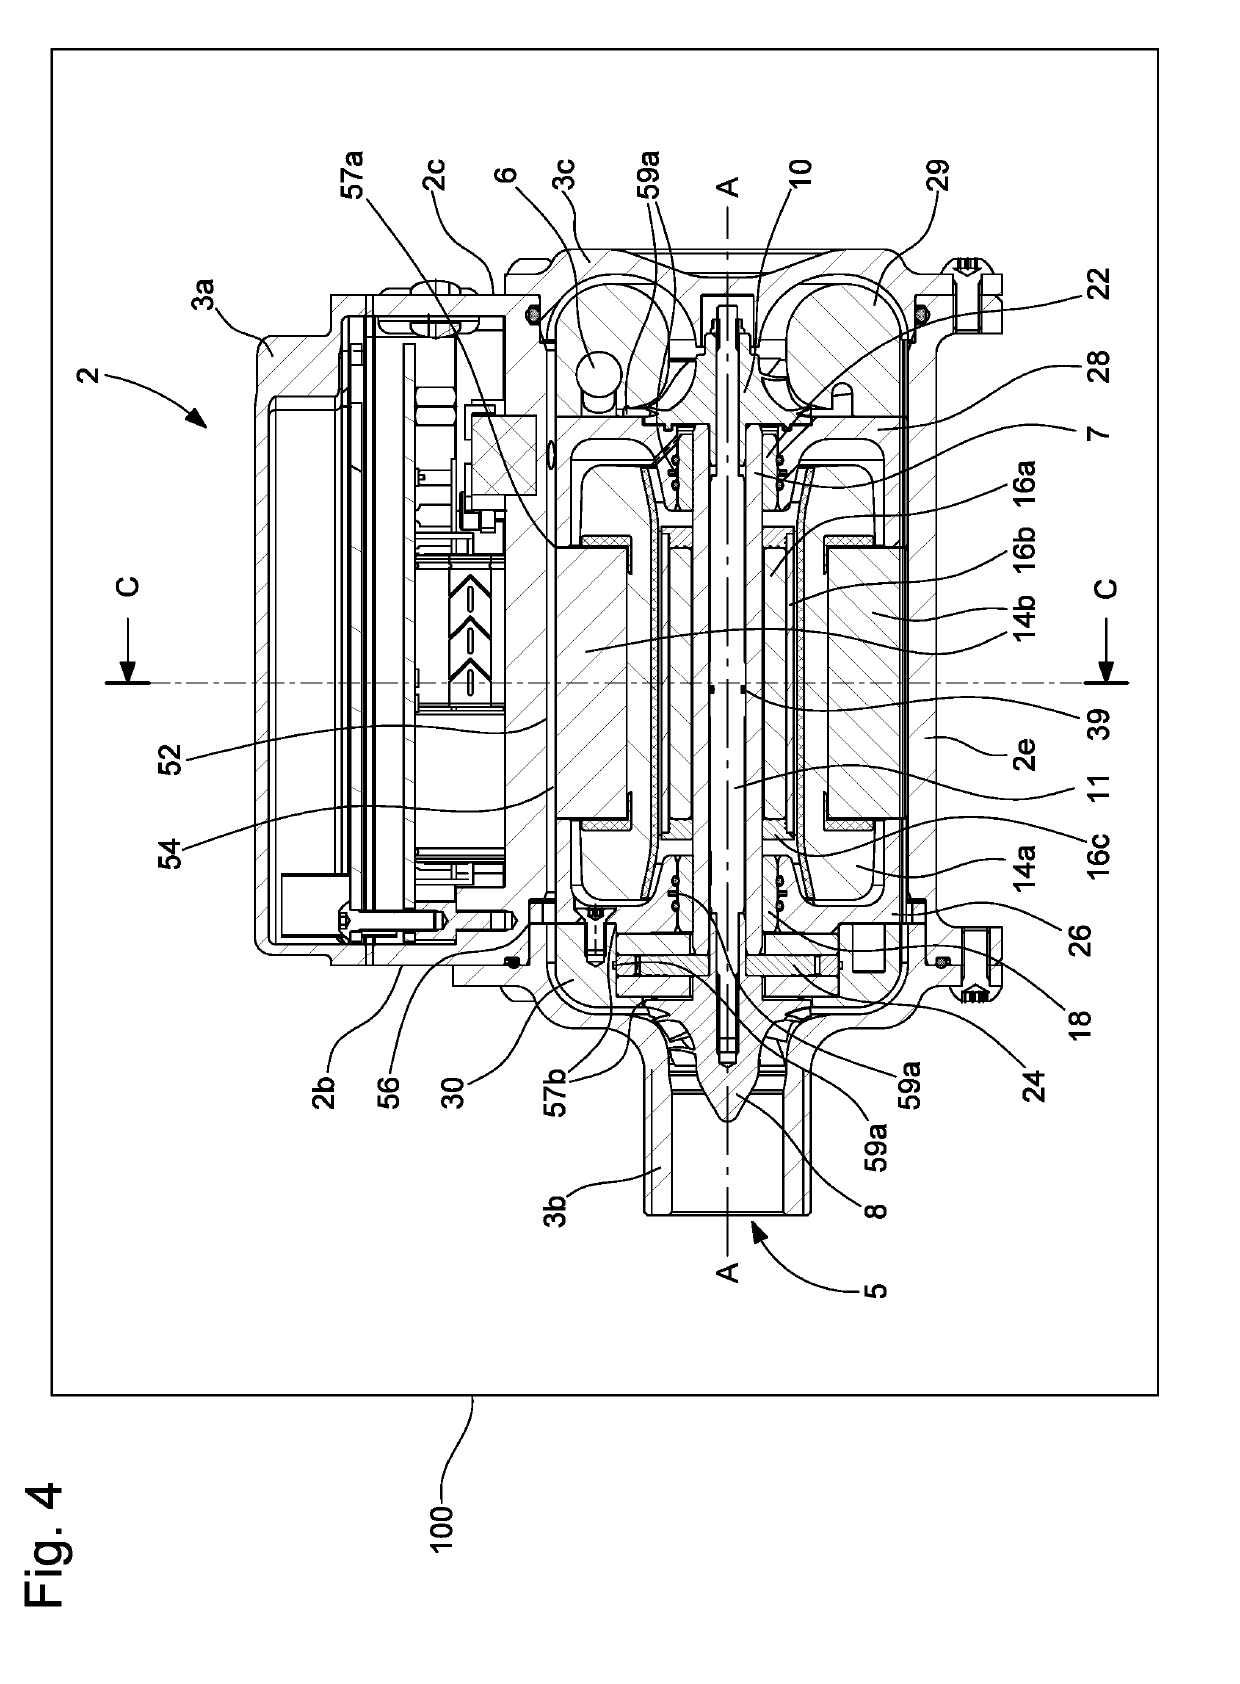 Heating, ventilation and air conditioning system comprising a fluid compressor